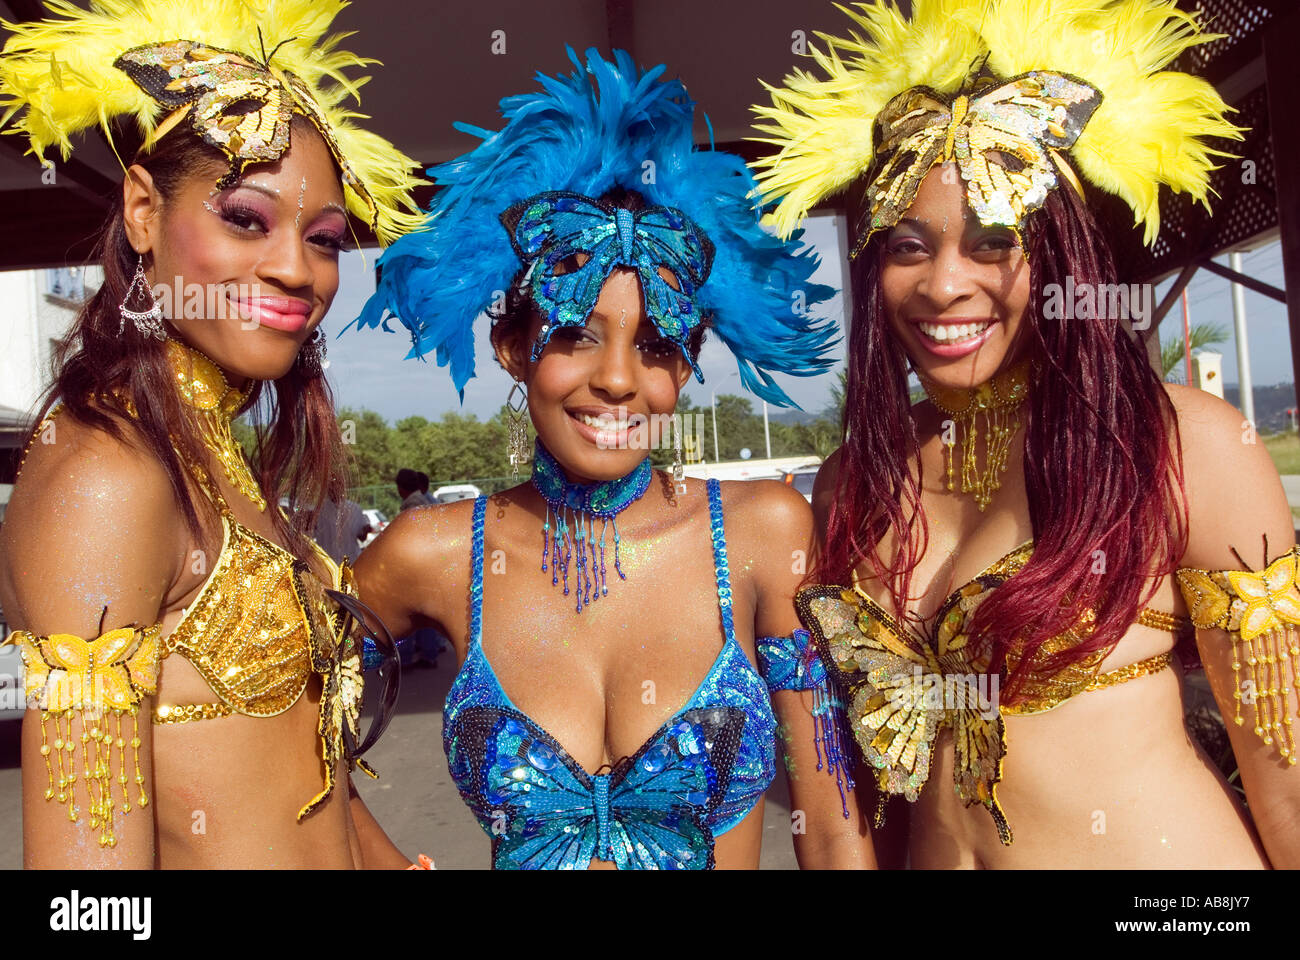 West Indies Trinidad Port of Spain Carnival 2006 Parade dancers in colorful costumes Stock Photo